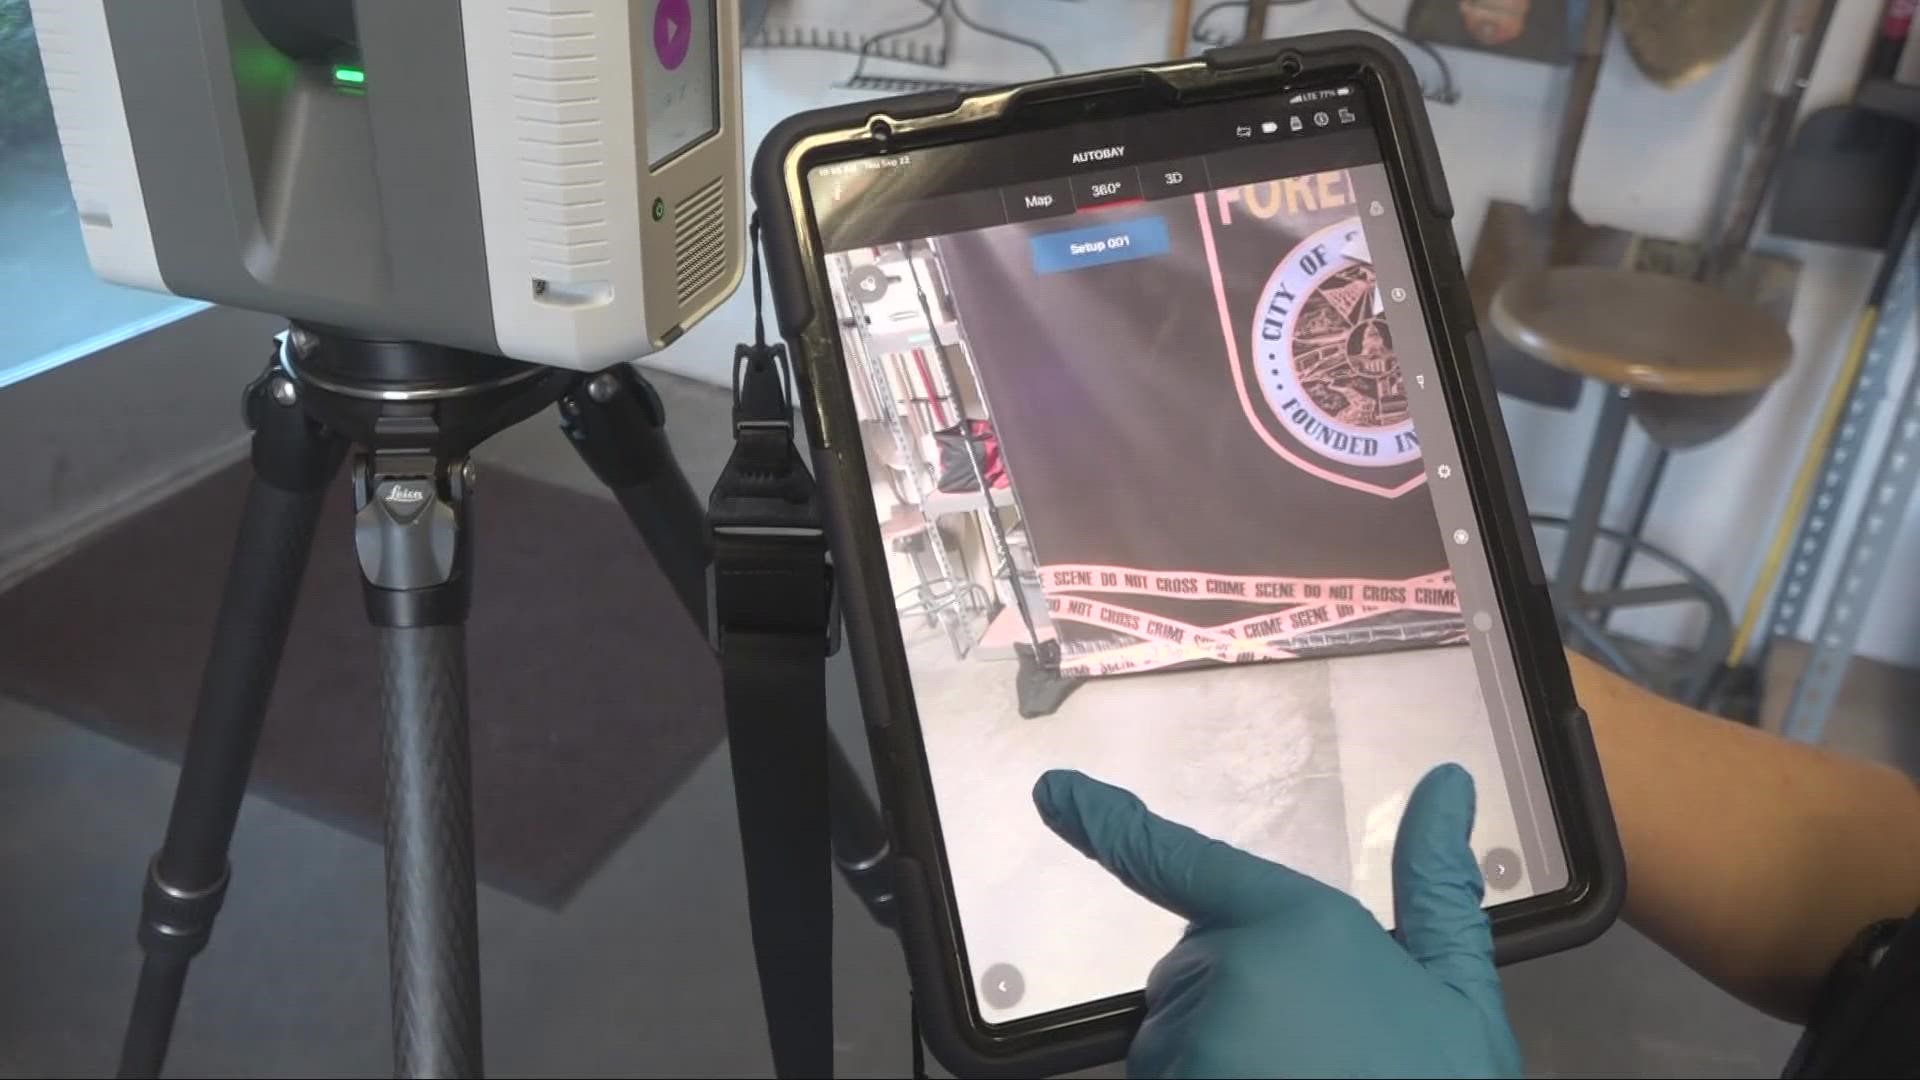 While the Sacramento Police Department's forensics team usually works behind the scenes, they're now stepping into the spotlight for National Forensic Science Week.